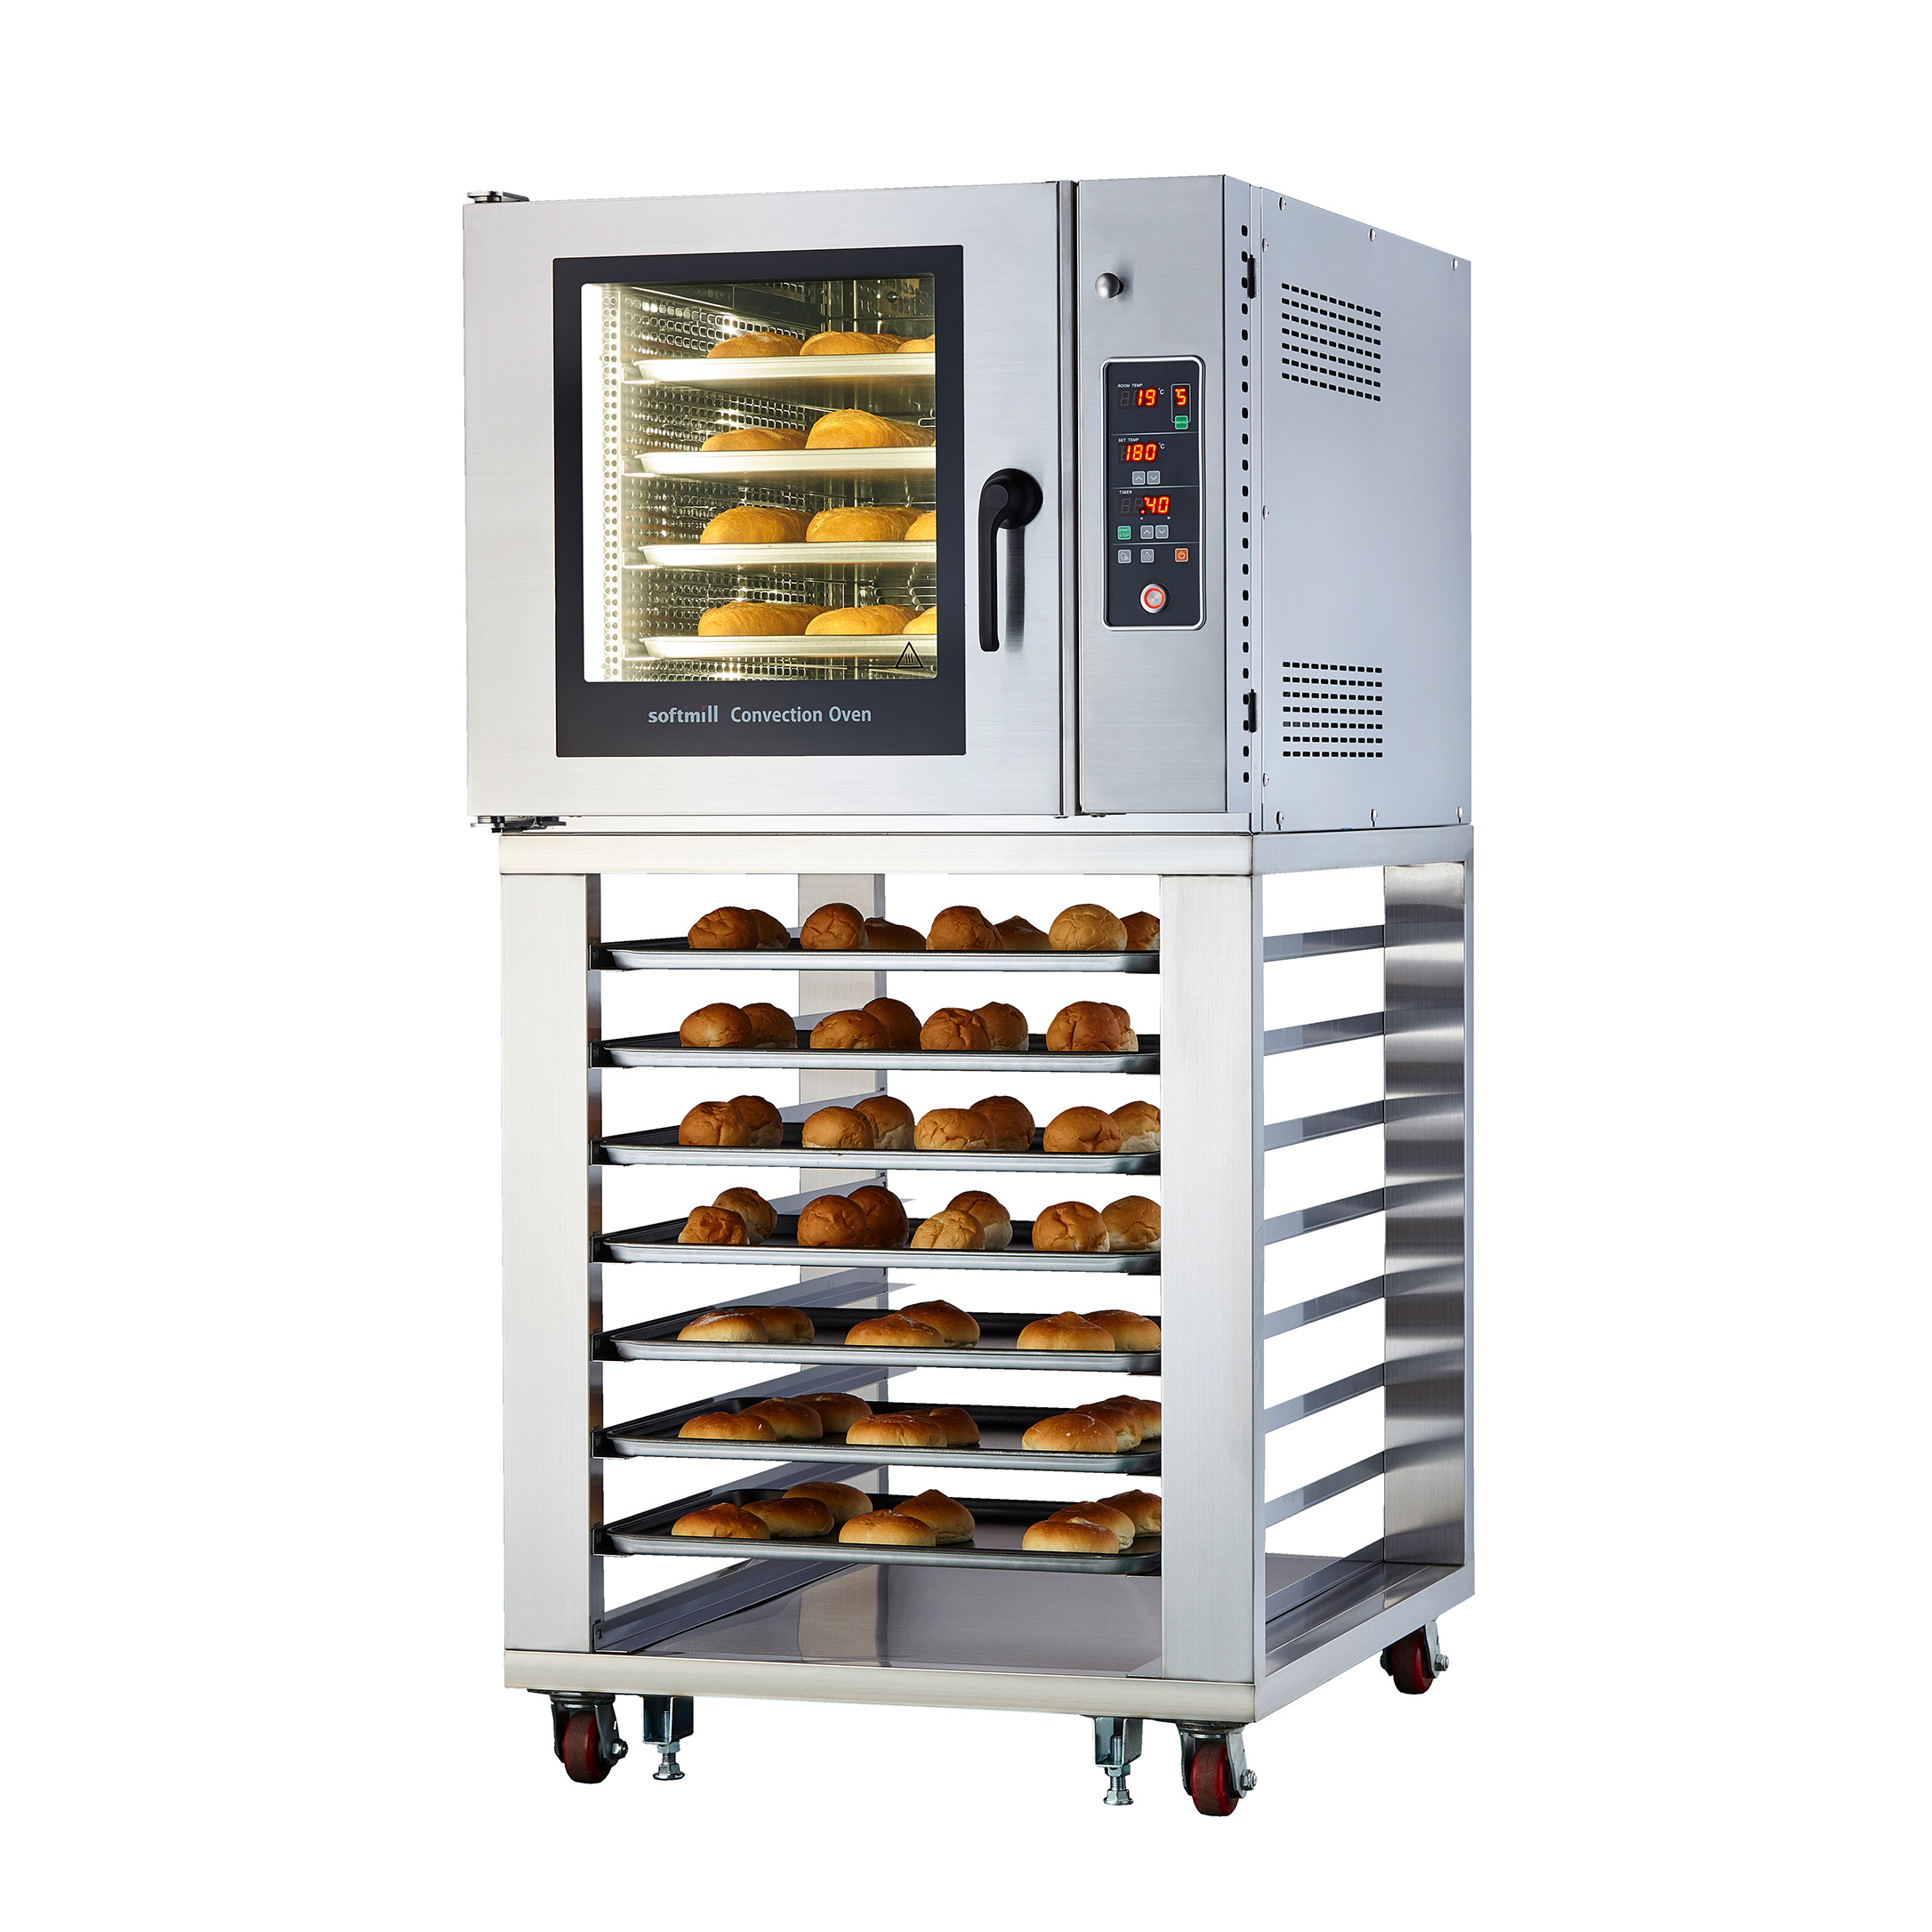 Convection Oven 5 trays detail carousel mini size images